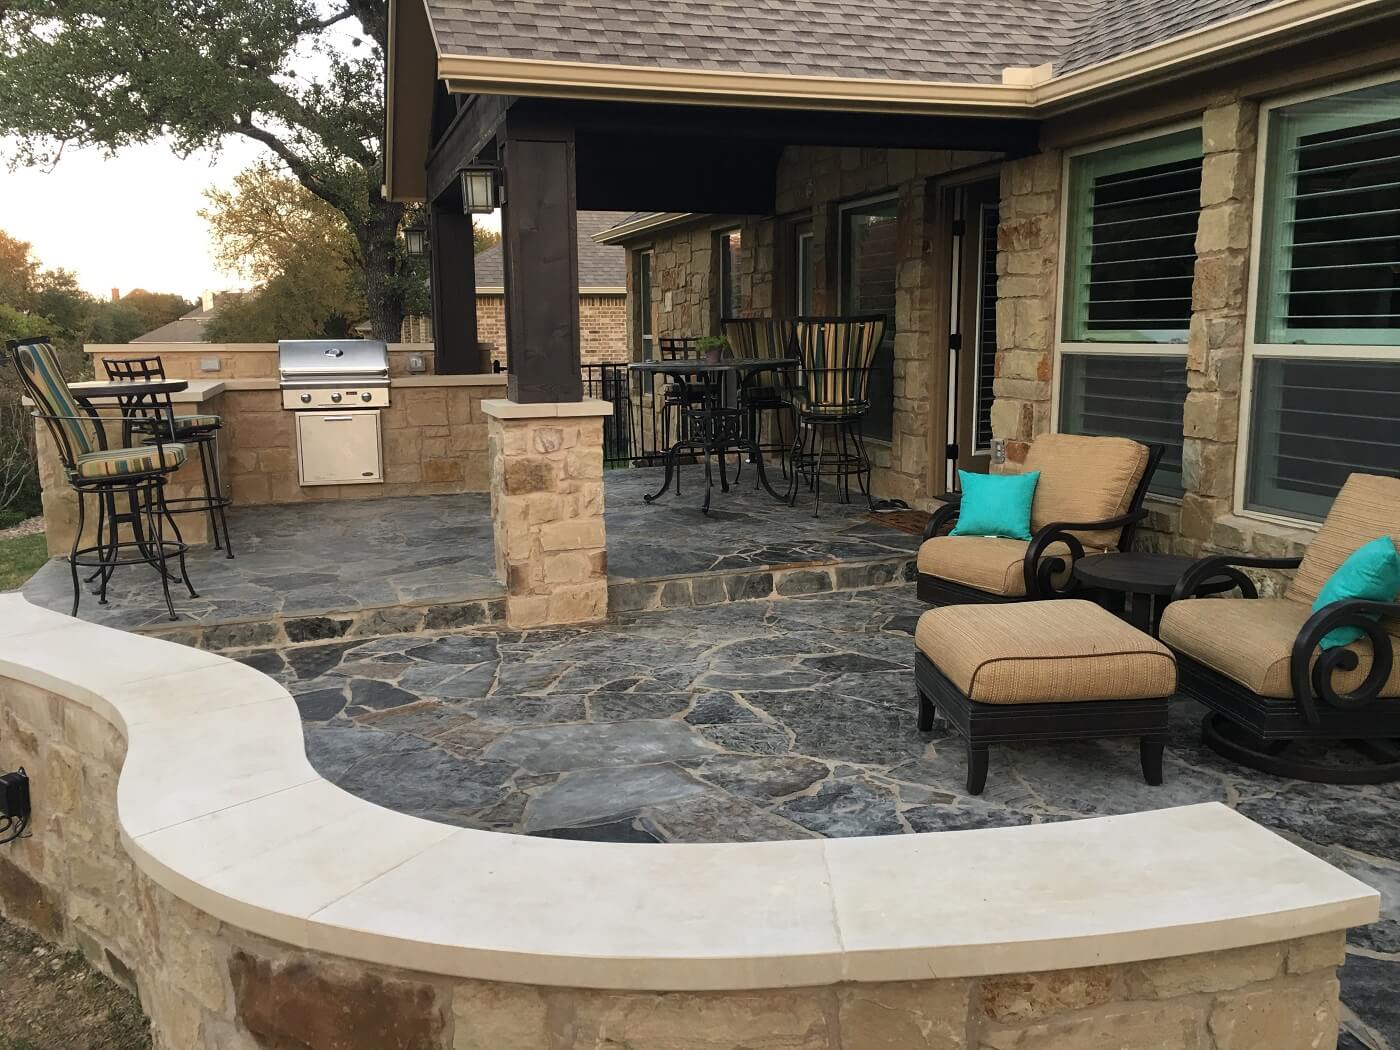 Covered and open patio with outdoor kitchen and seating area